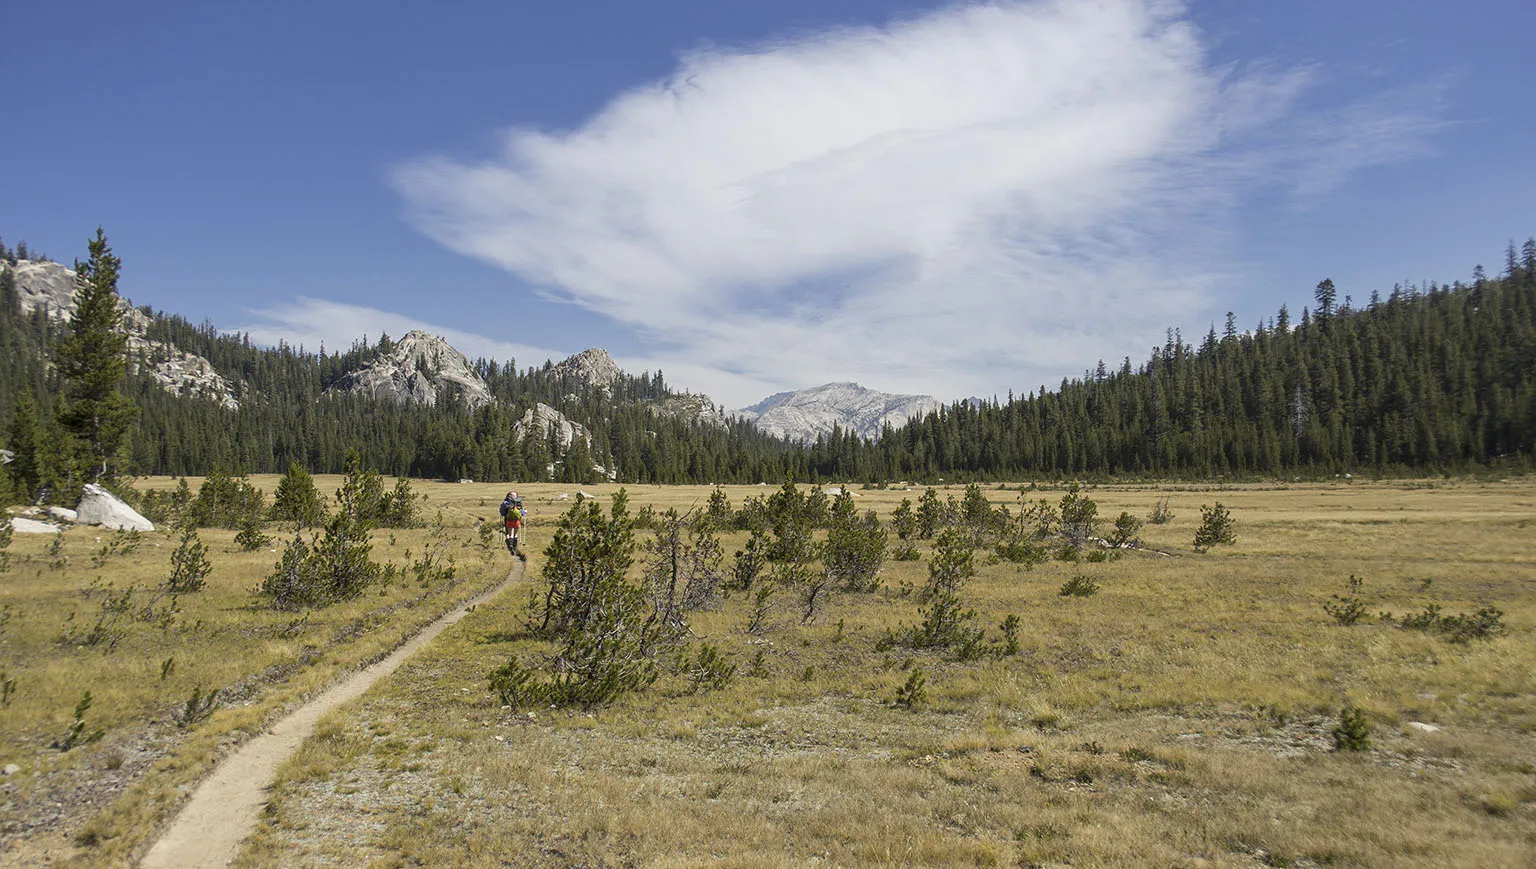 The PCT in Cold Canyon, looking north